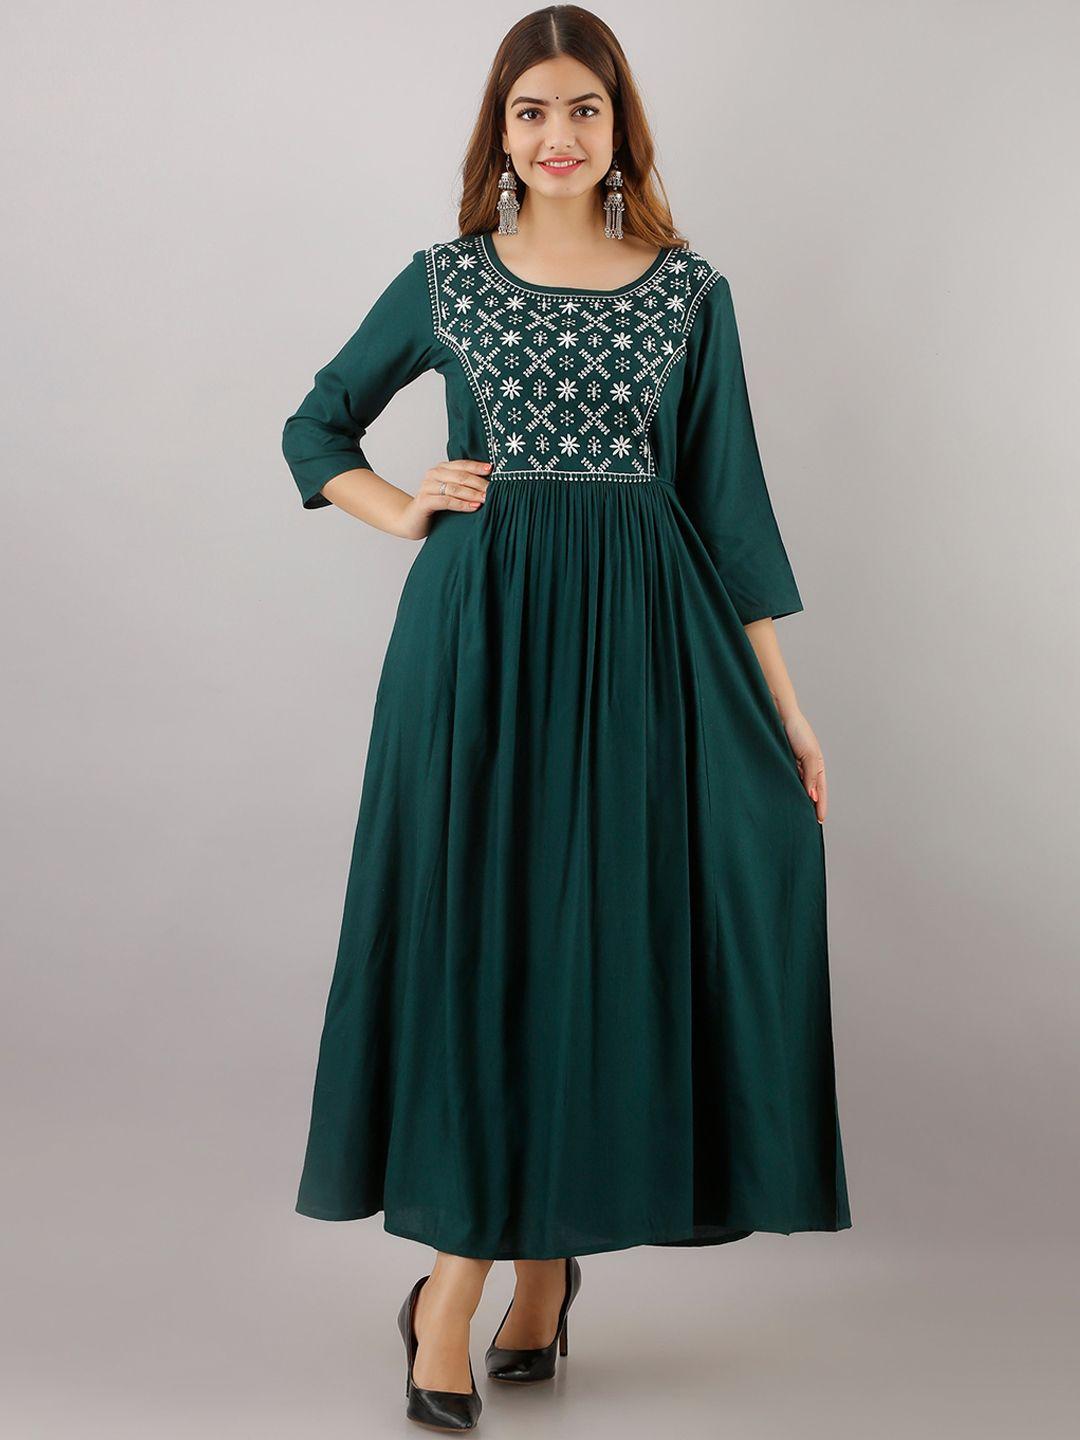 women touch green floral embroidered ethnic midi fit & flared dress